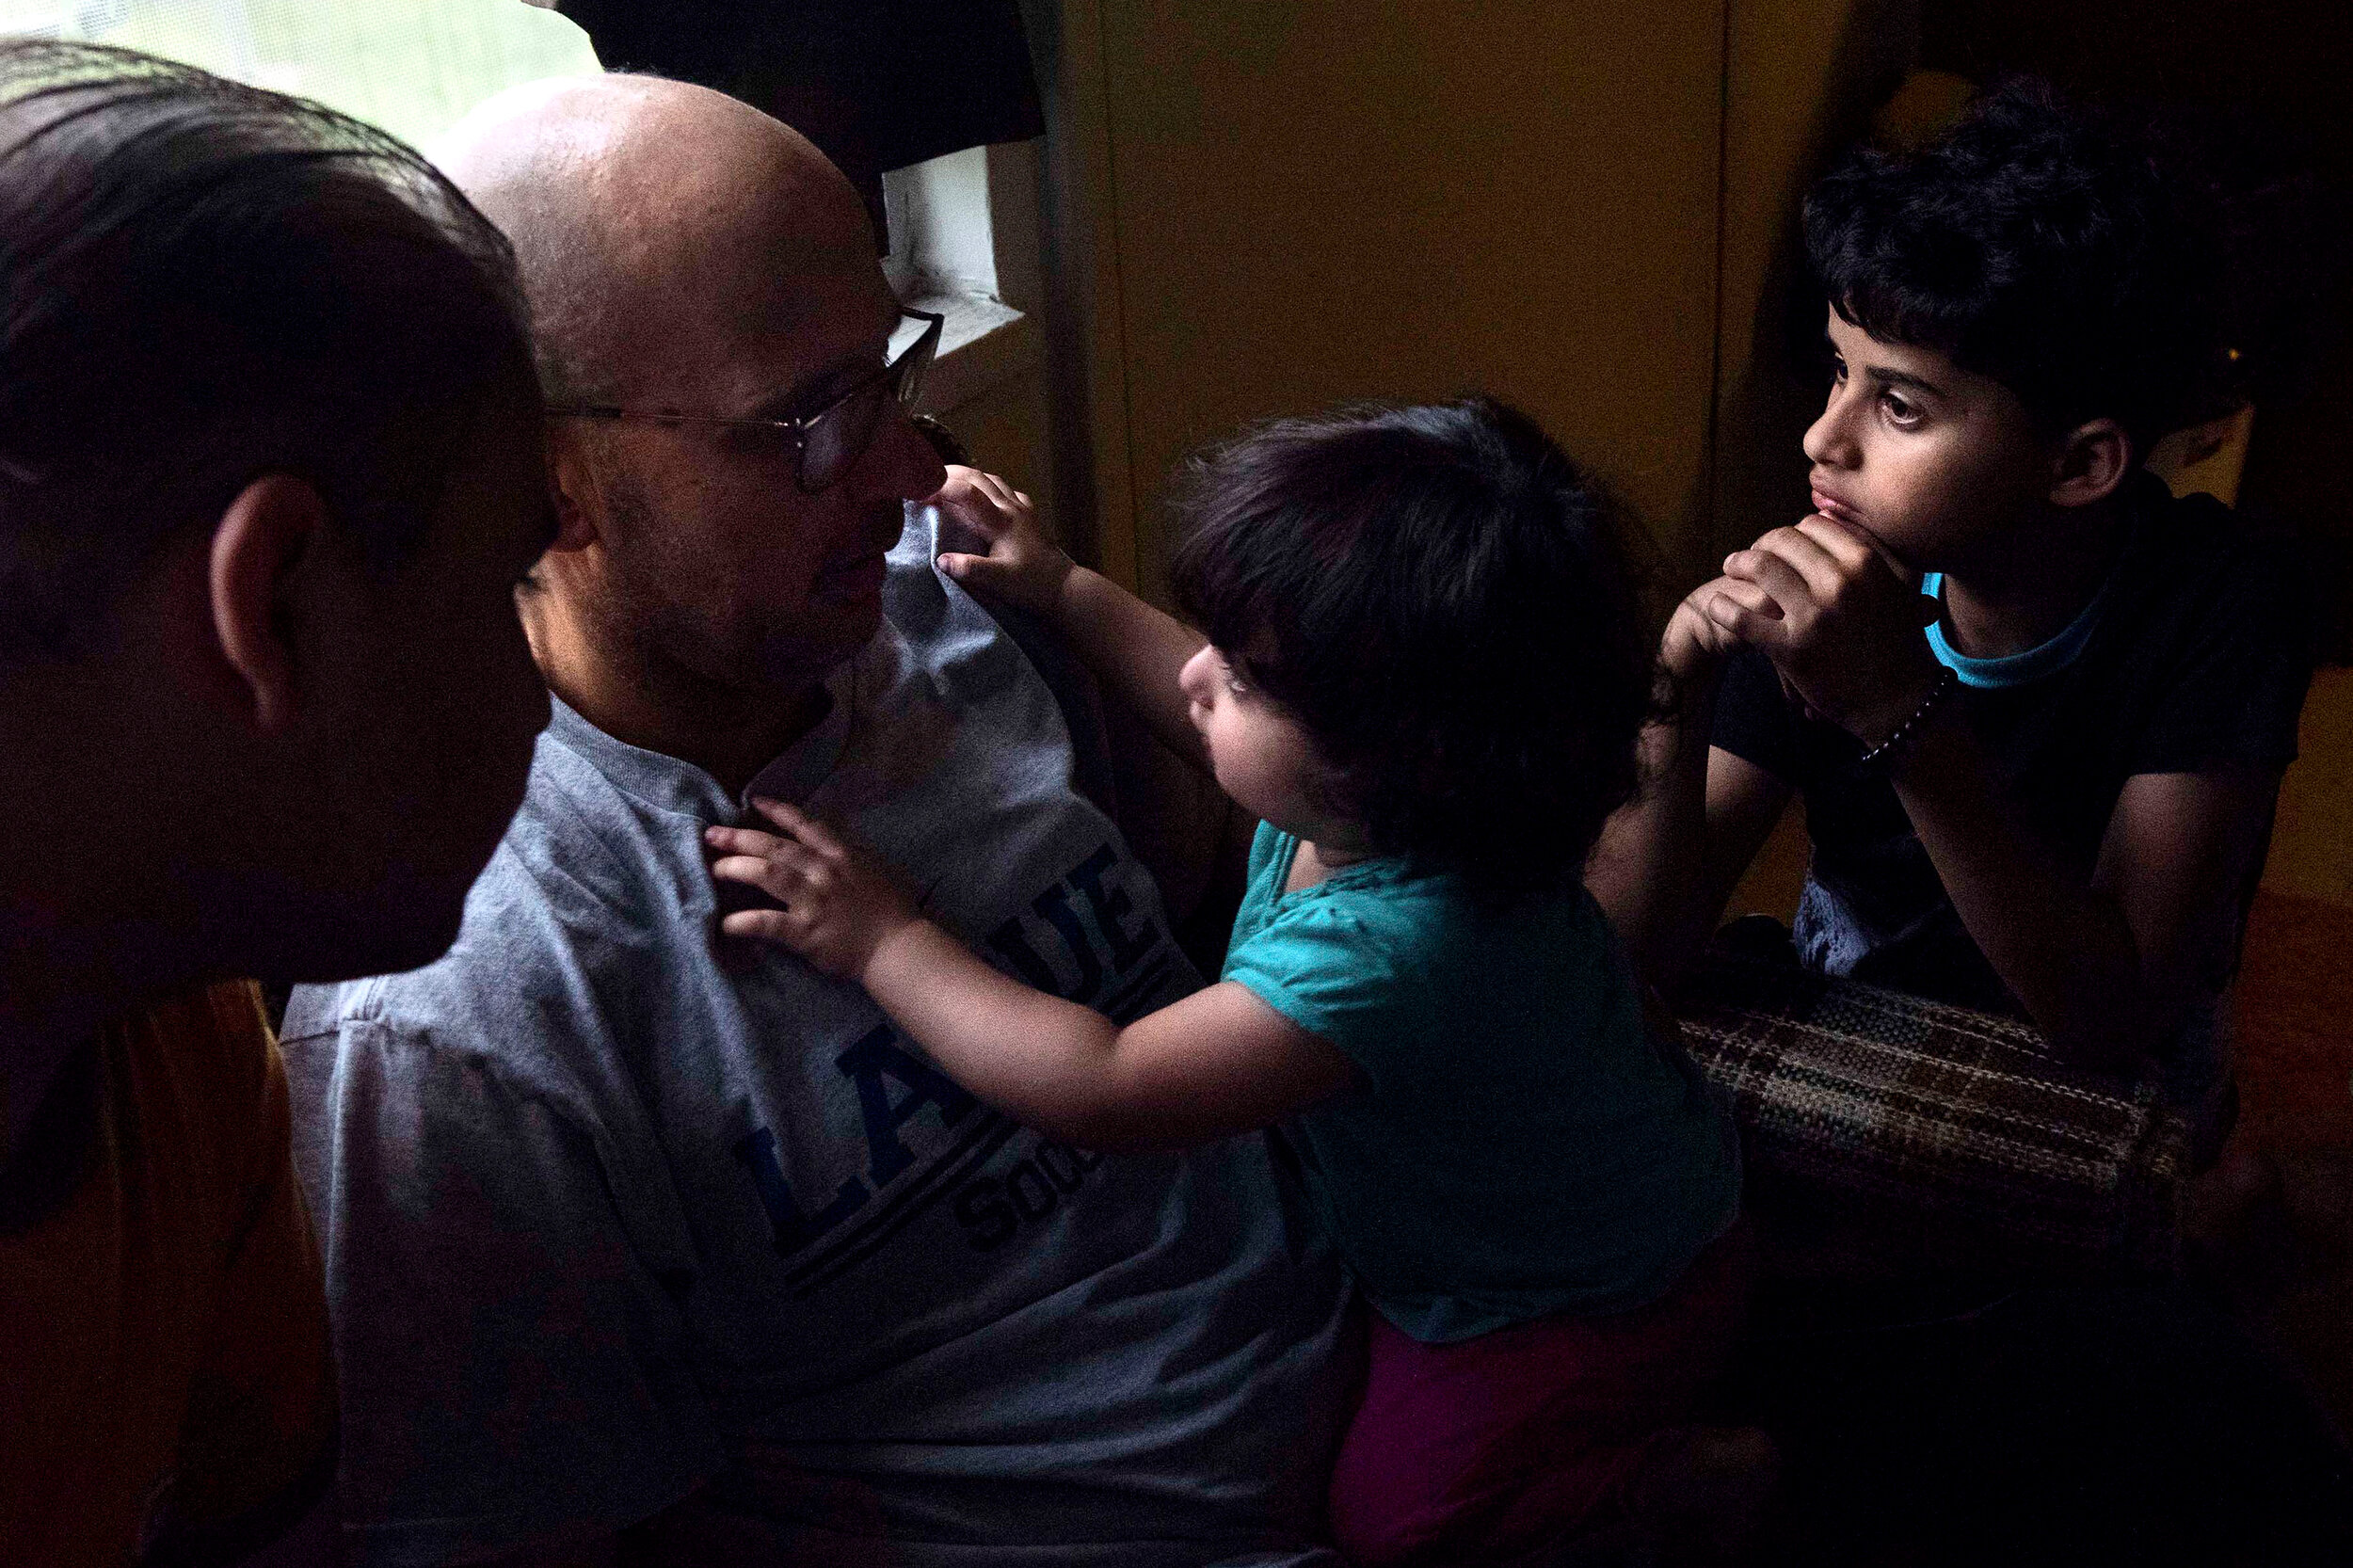  Zahra, 1, the youngest of the family, grabs onto her father Mohammed Al Hraishawi on the last day of Ramadan, on Tuesday, June 3, 2019, at their home in Columbia, Missouri. Their father plans to return to Iraq in a few days in order to continue his 